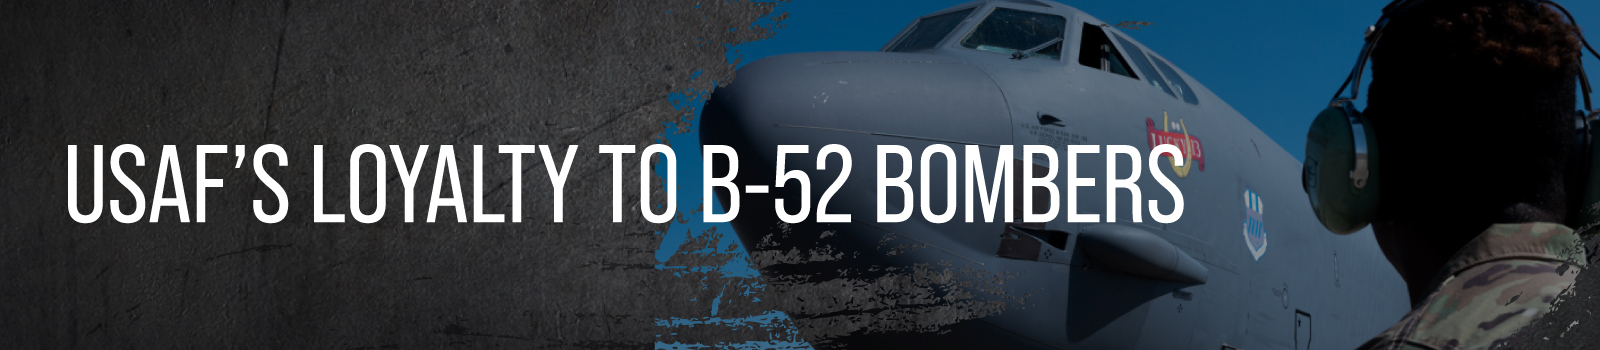 USAF’s Loyalty to B-52 Bombers